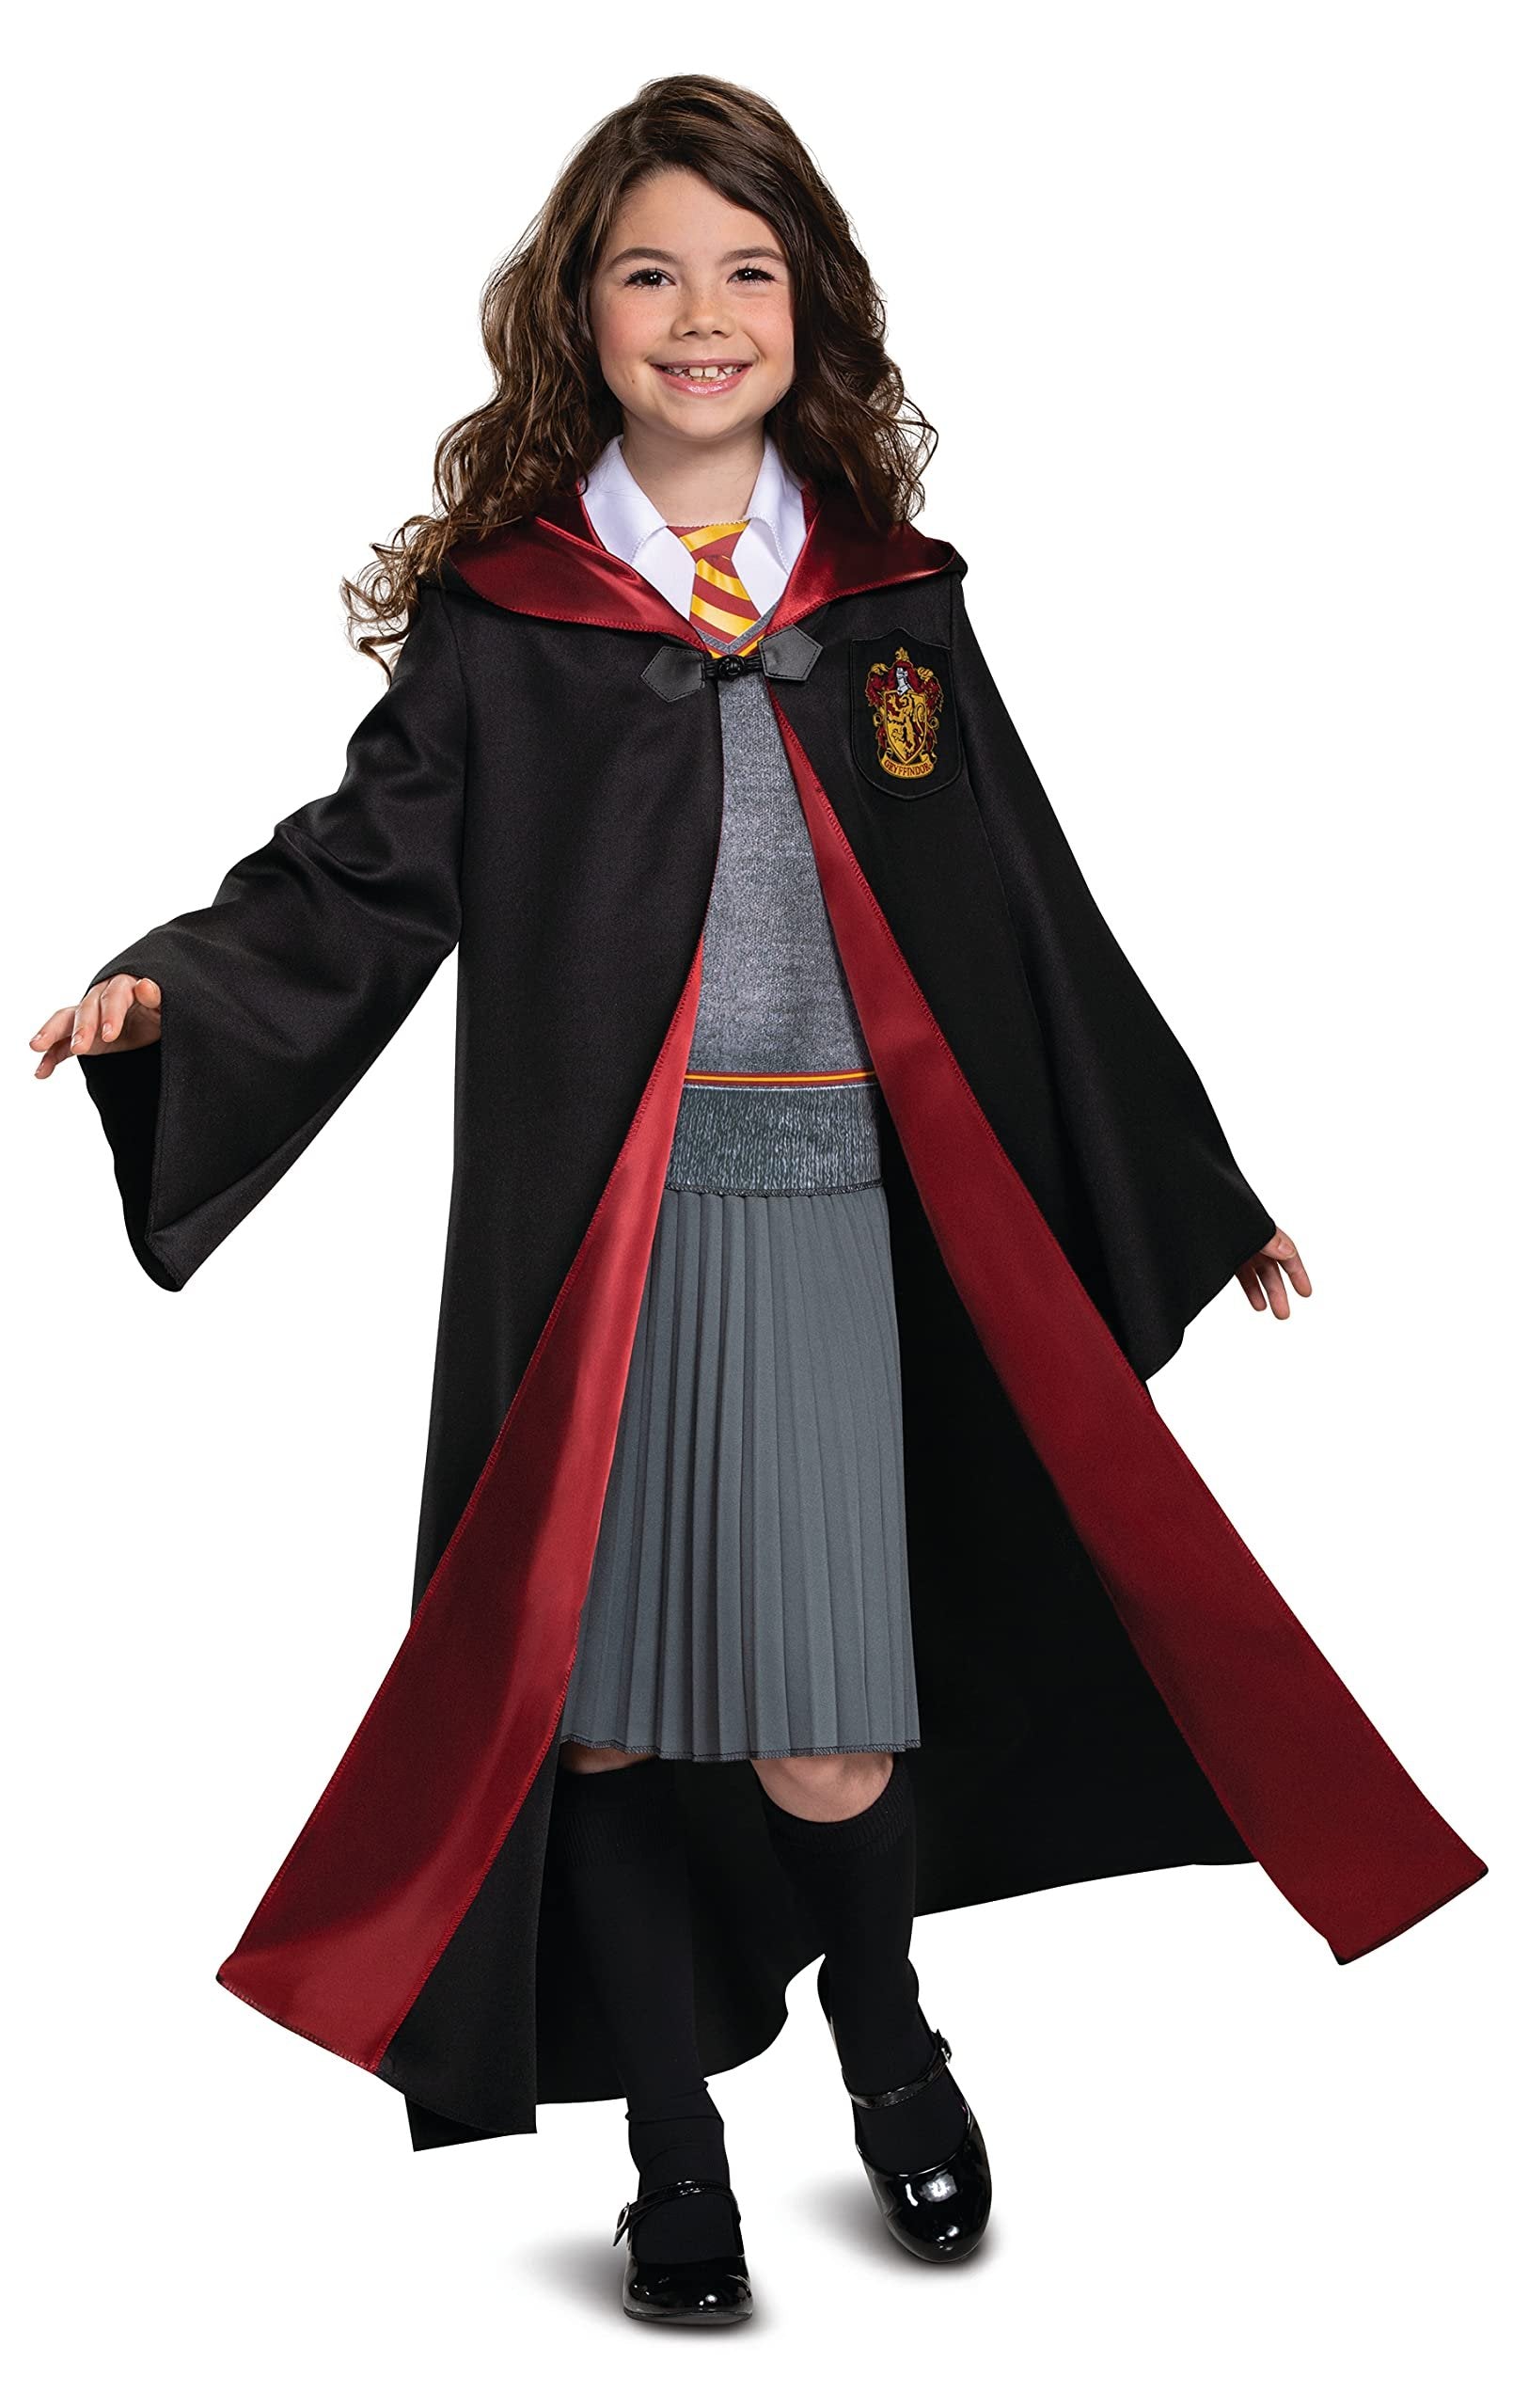 Disguise Hermione Granger Deluxe Costume - Kids Small (4-6x) Black & Red